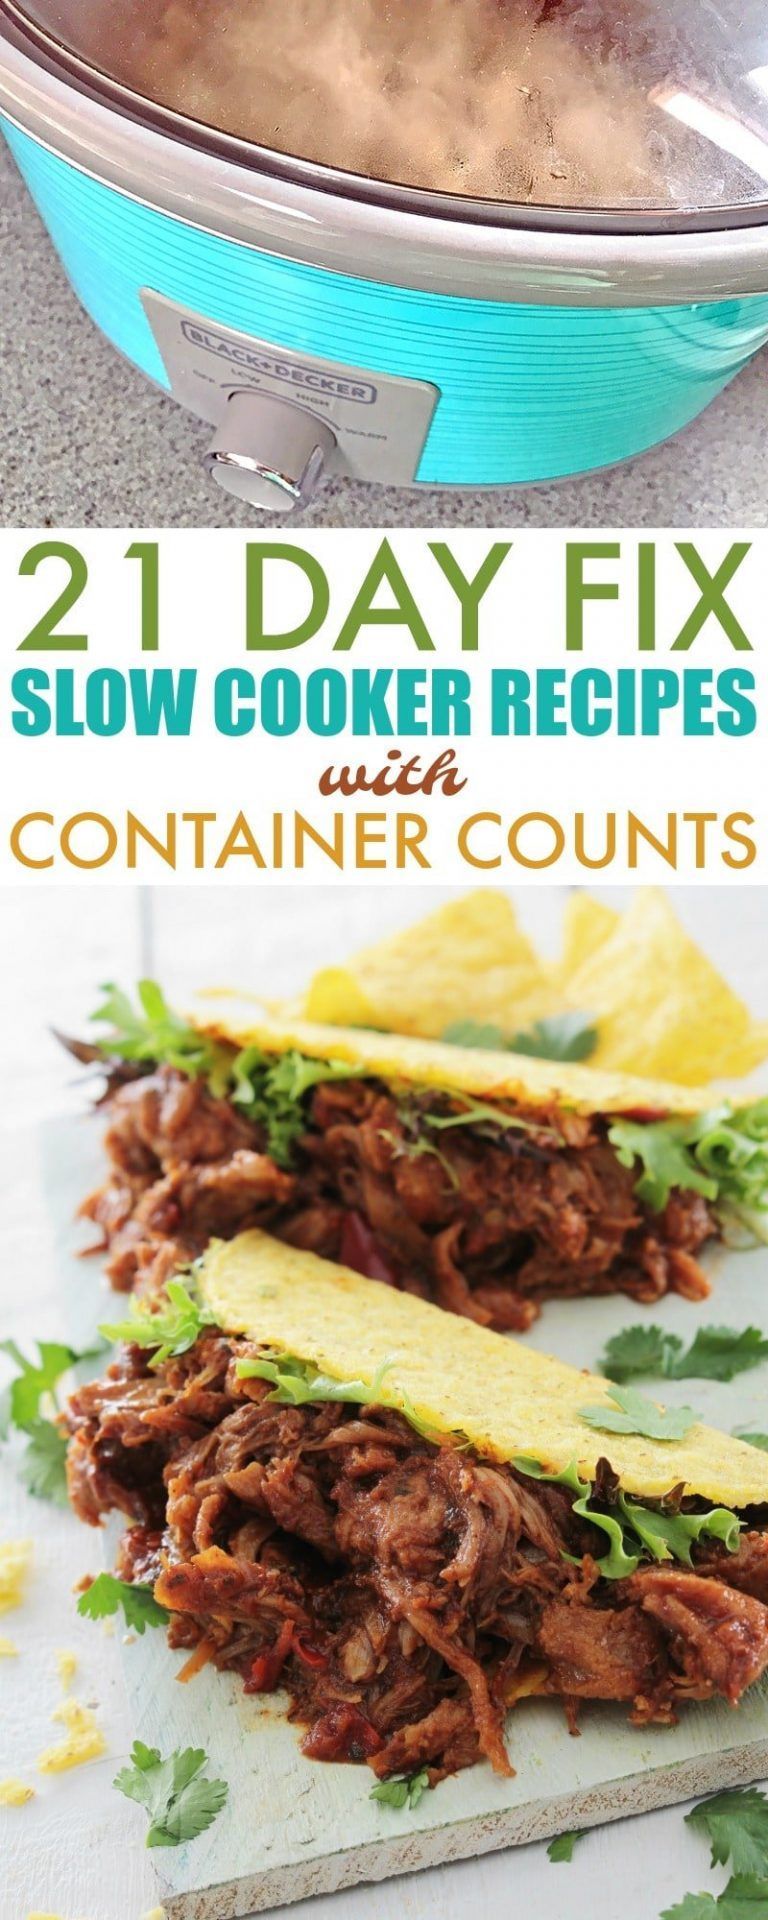 21 Day Fix Recipes: 21 Day Fix Slow Cooker Recipes -   14 21 day
 ideas